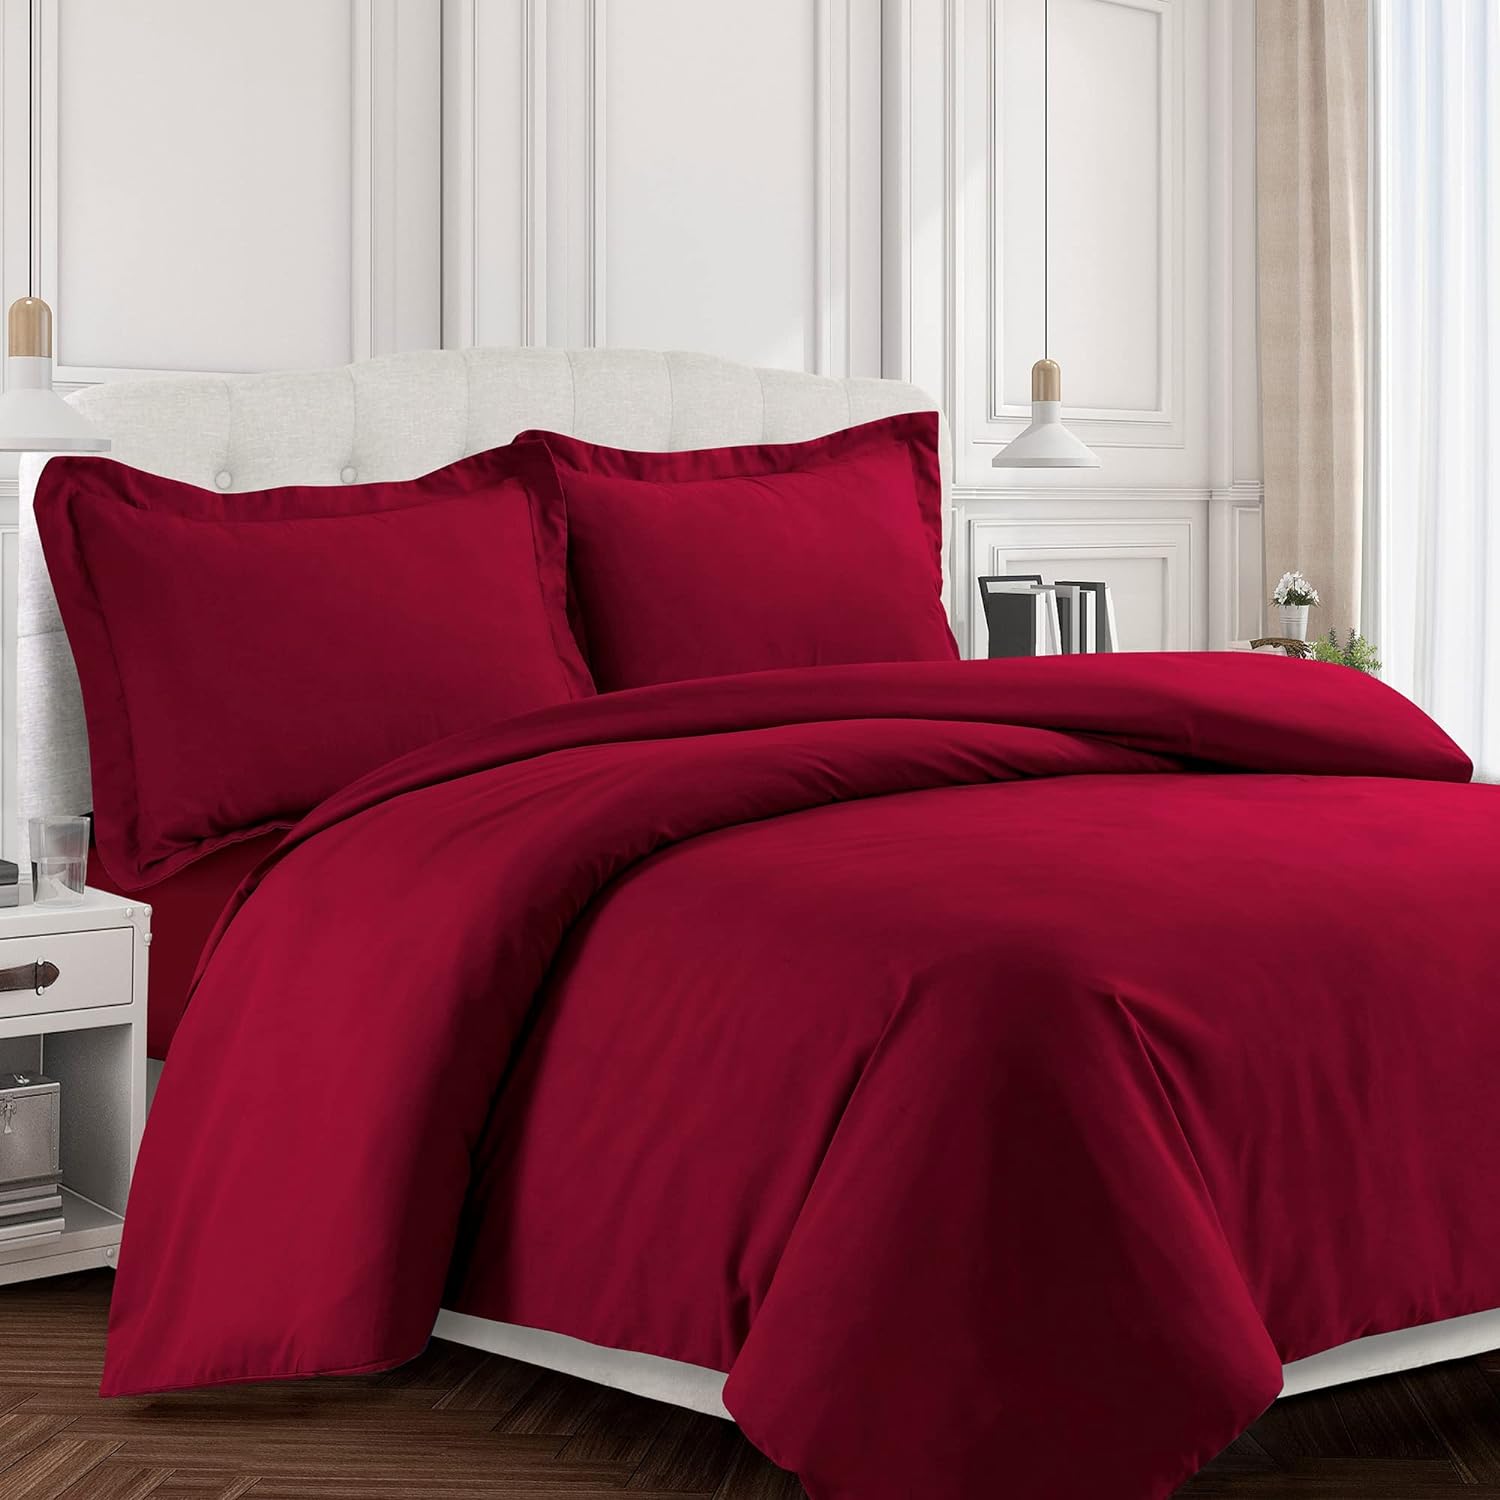 Tribeca Living King Duvet Cover Set, Soft Plain Bed Set Wrinkle Resistant Bedding, Microfiber, Includes One Duvet Cover and Two Sham Pillowcases, Durable Bedding 110 GSM, Valencia/Deep Red